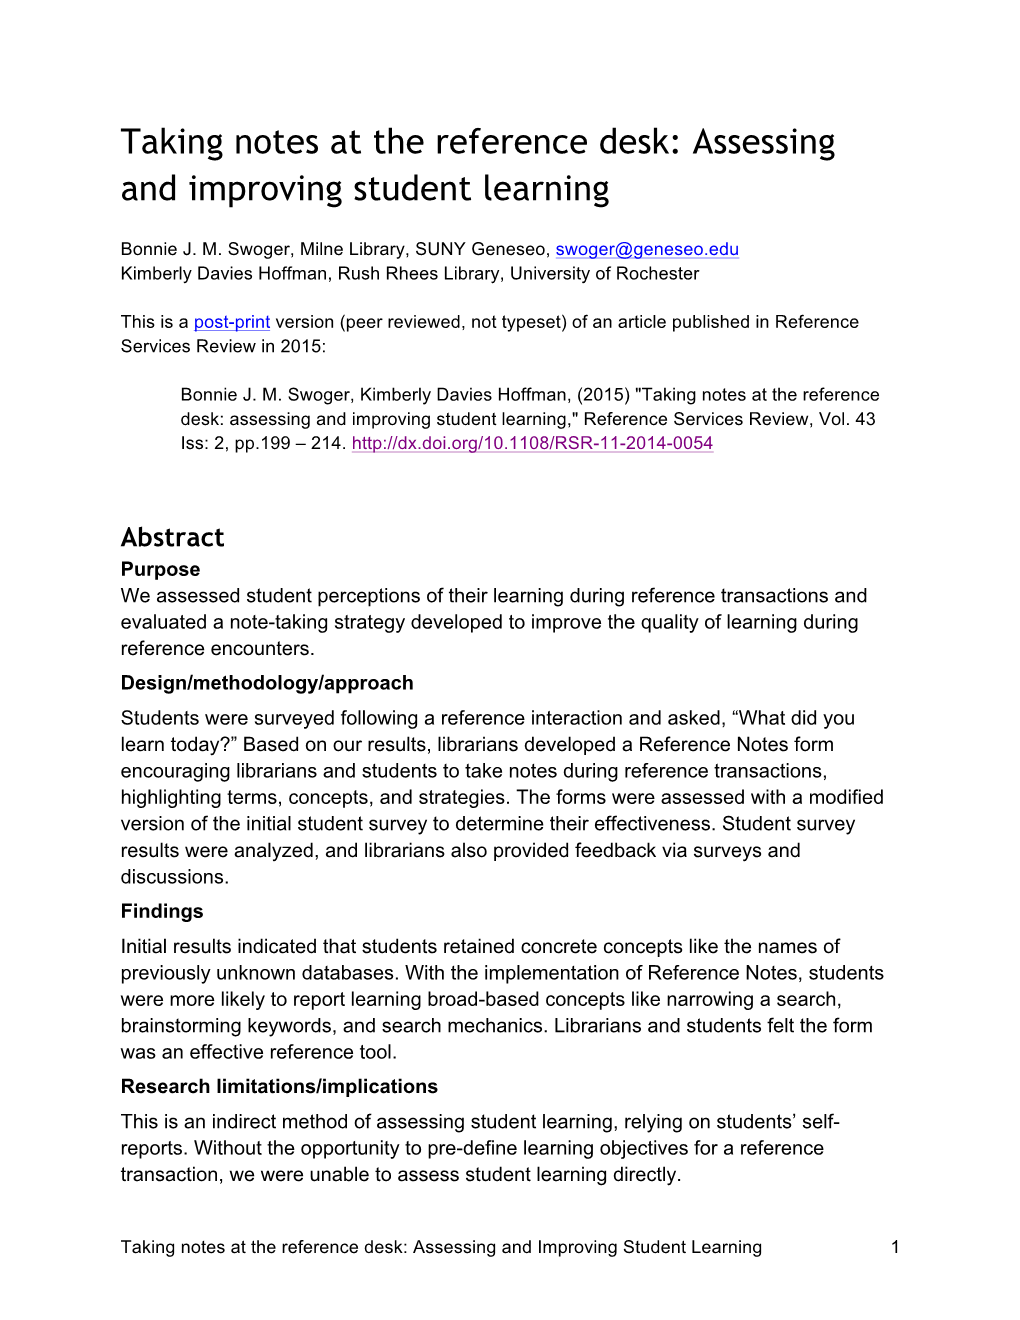 Taking Notes at the Reference Desk: Assessing and Improving Student Learning